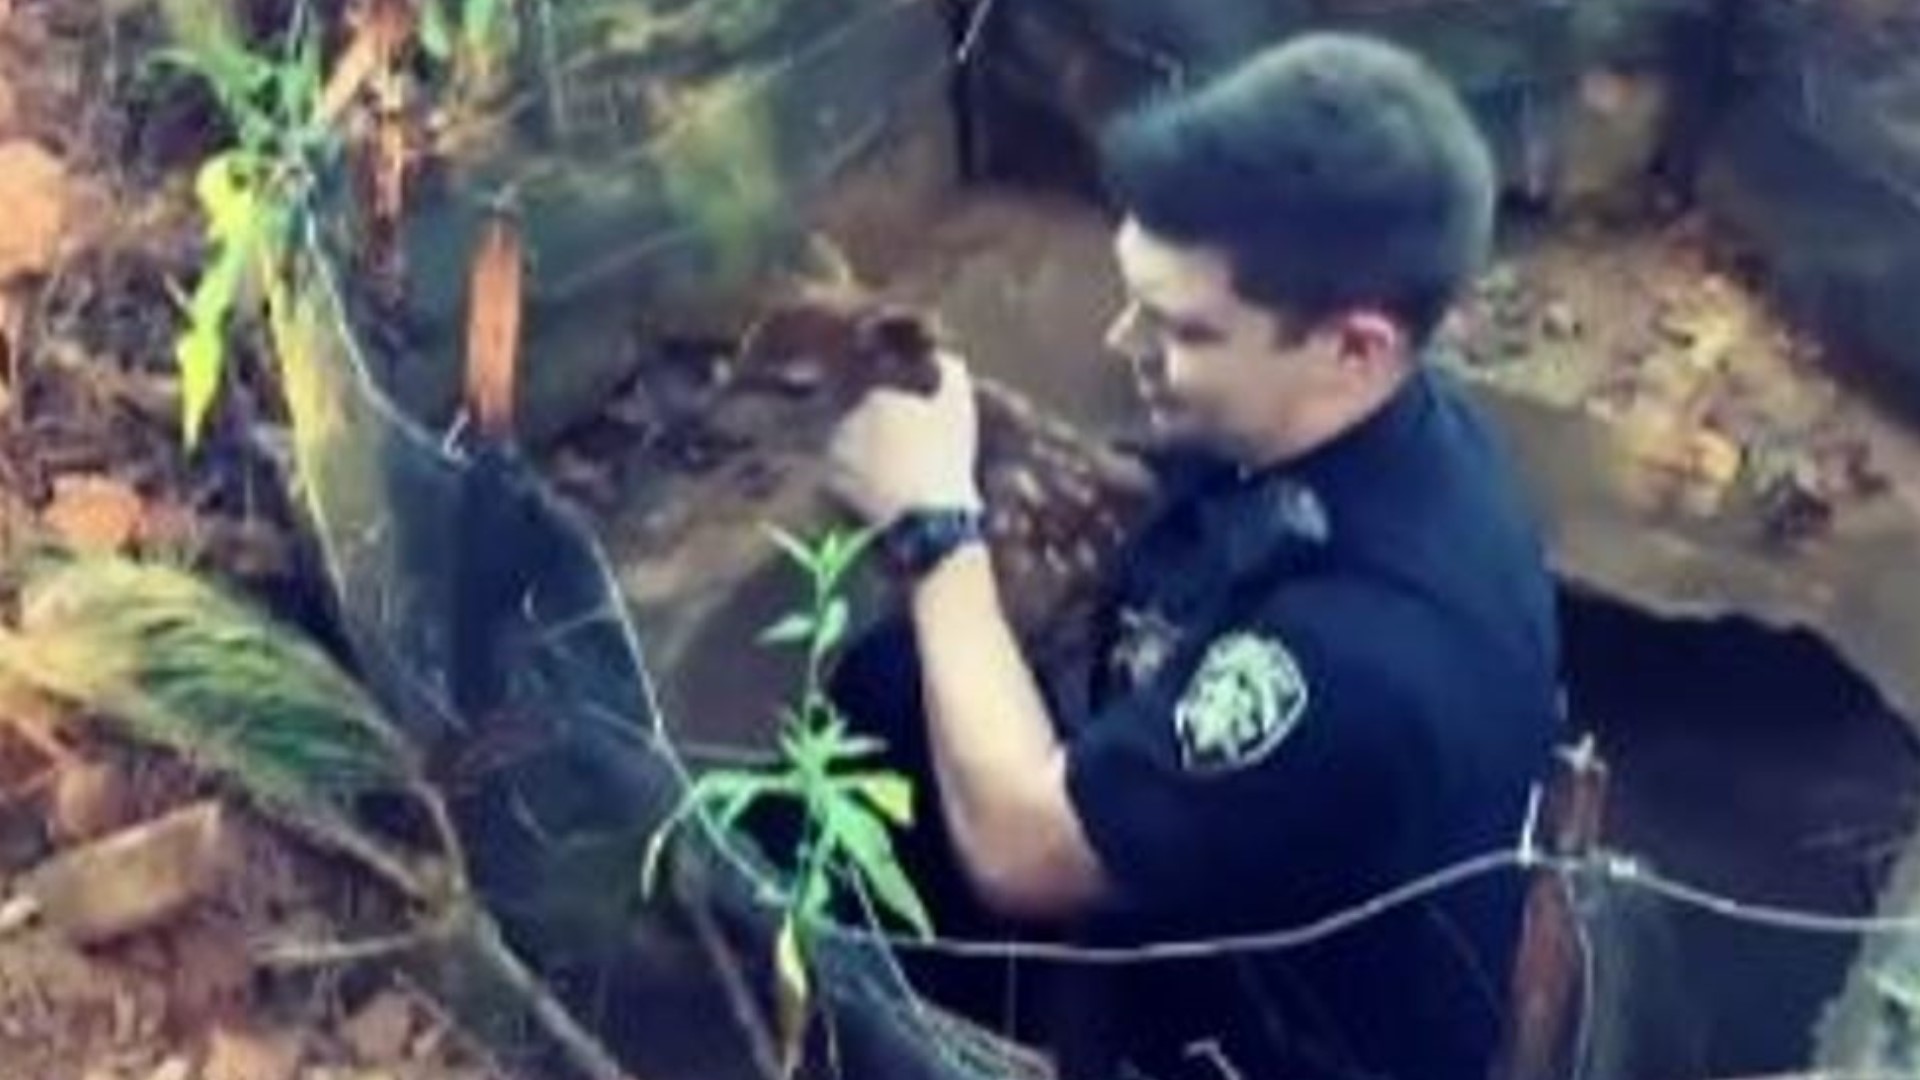 The Cherokee County Sheriff's Office posted the video of a deputy pulling a deer out of a utility hole.